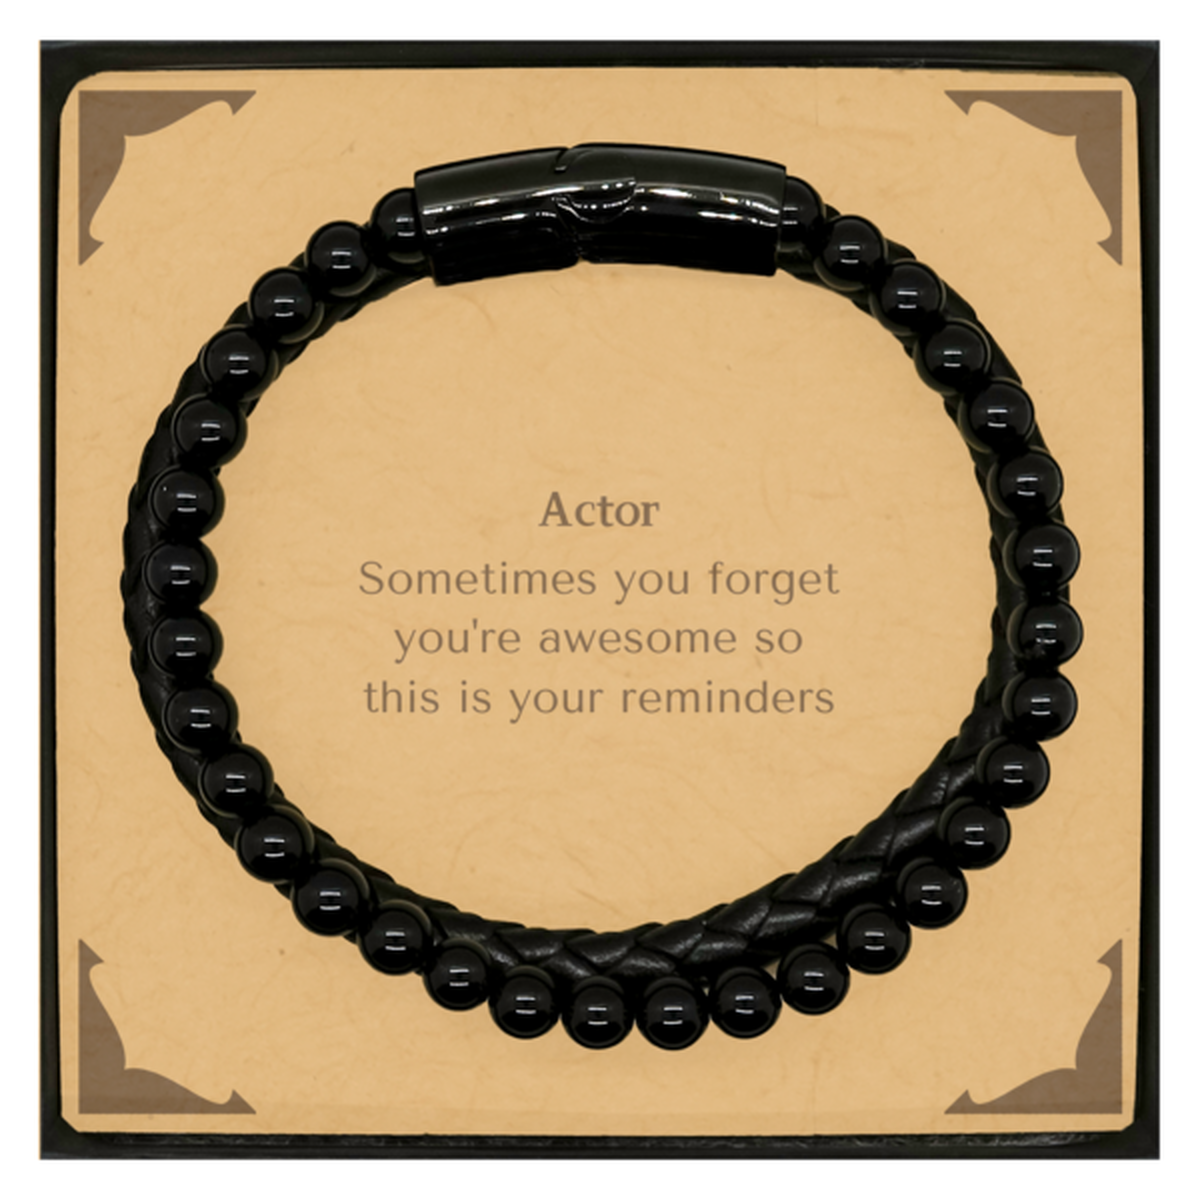 Sentimental Actor Stone Leather Bracelets, Actor Sometimes you forget you're awesome so this is your reminders, Graduation Christmas Birthday Gifts for Actor, Men, Women, Coworkers